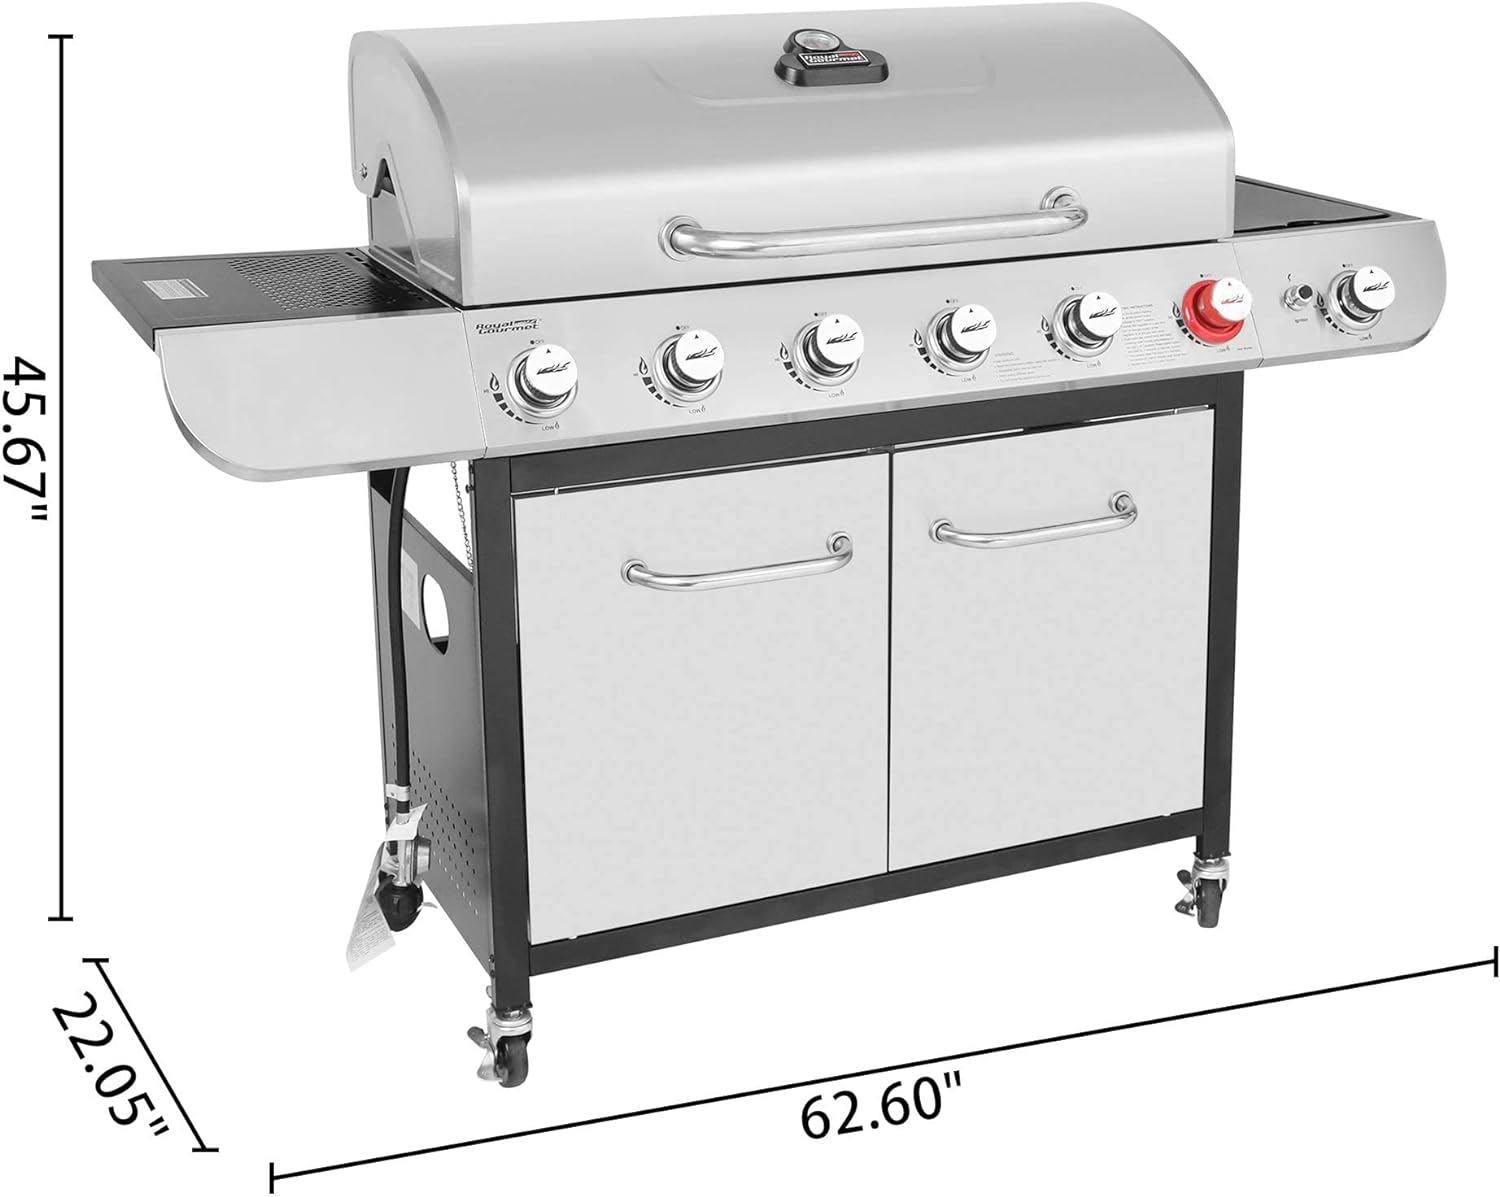 Royal Gourmet Gas Grill Review